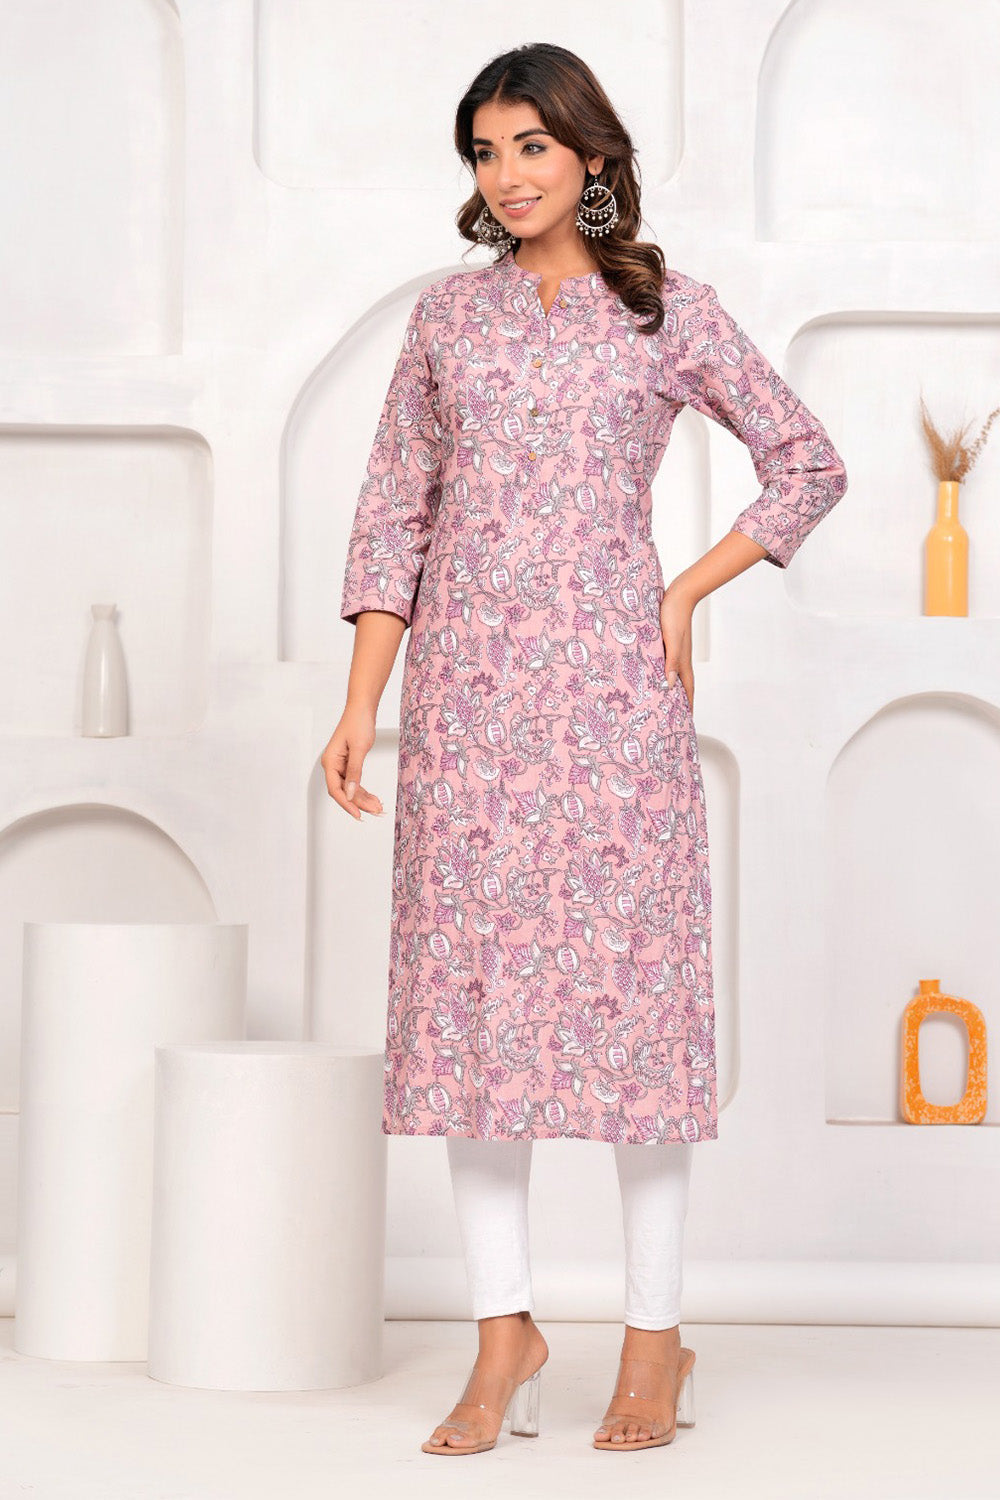 Dusty Pink Color Cotton Printed Long Kurti